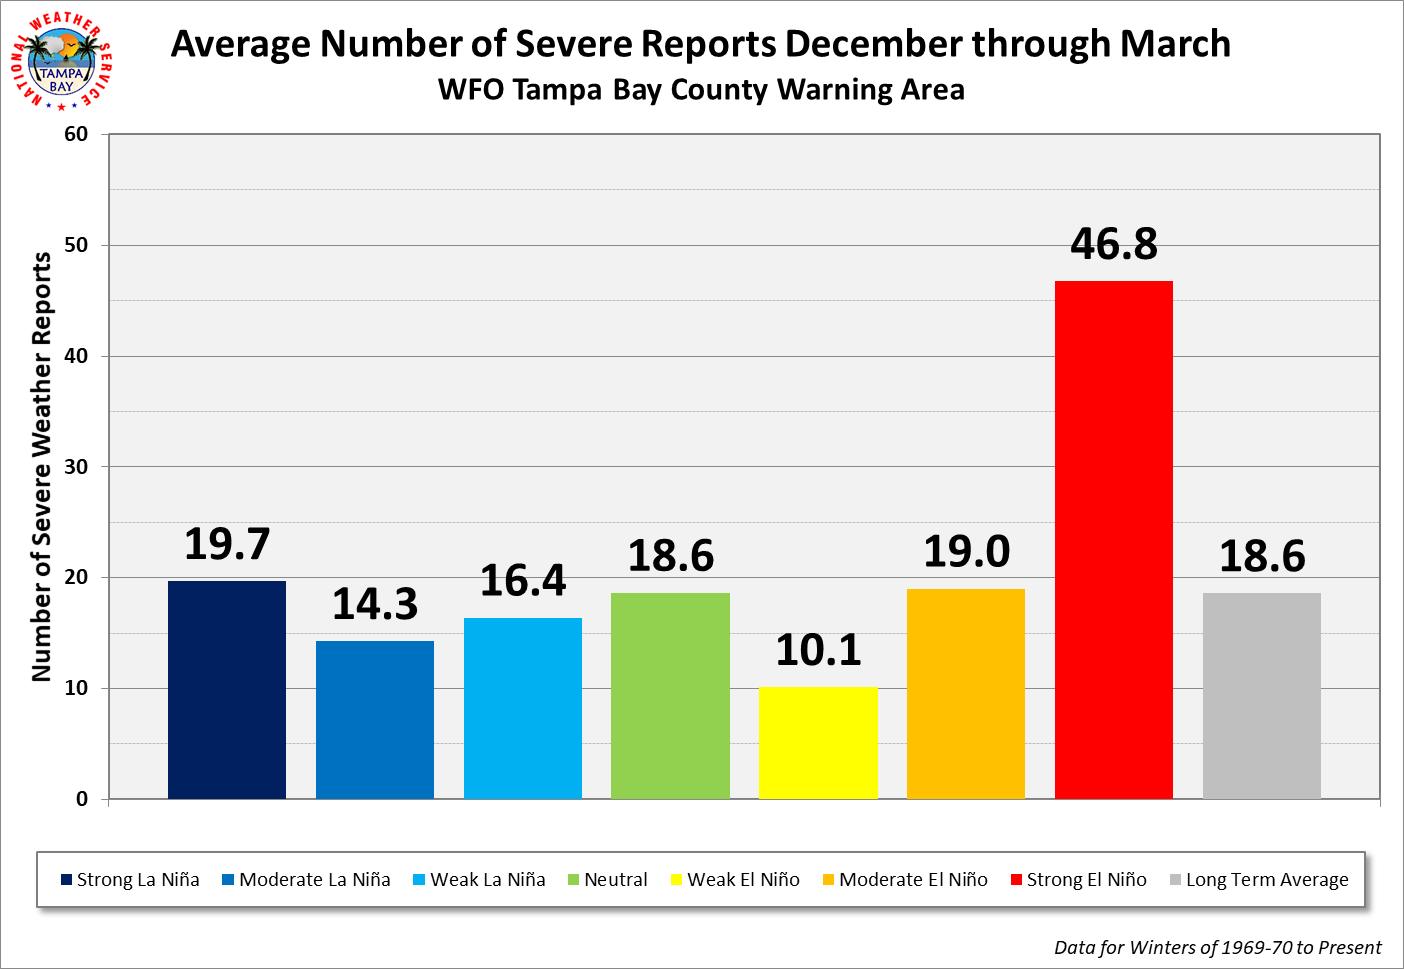 WFO Tampa Bay Average Number of Severe Weather Events per Cool Season by ENSO Category